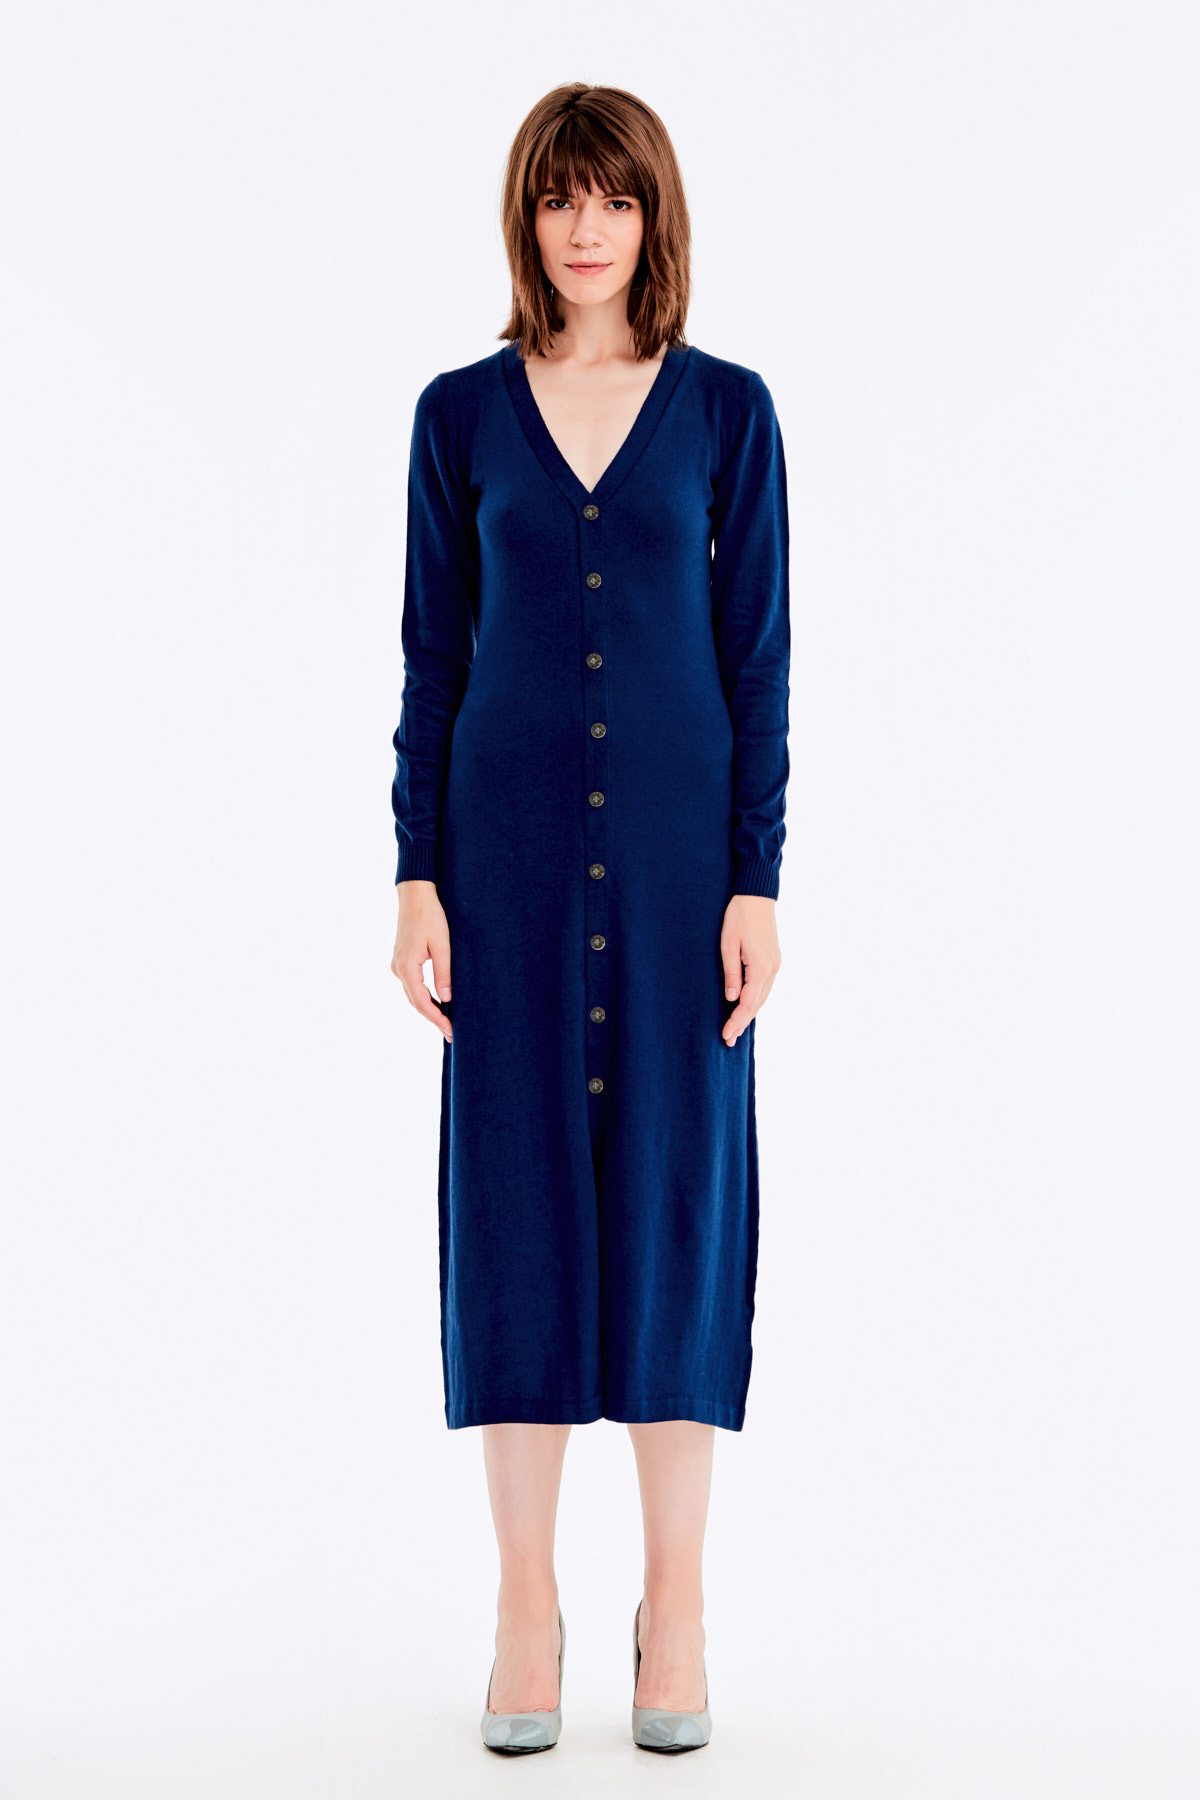 Blue knit dress with buttons, photo 5